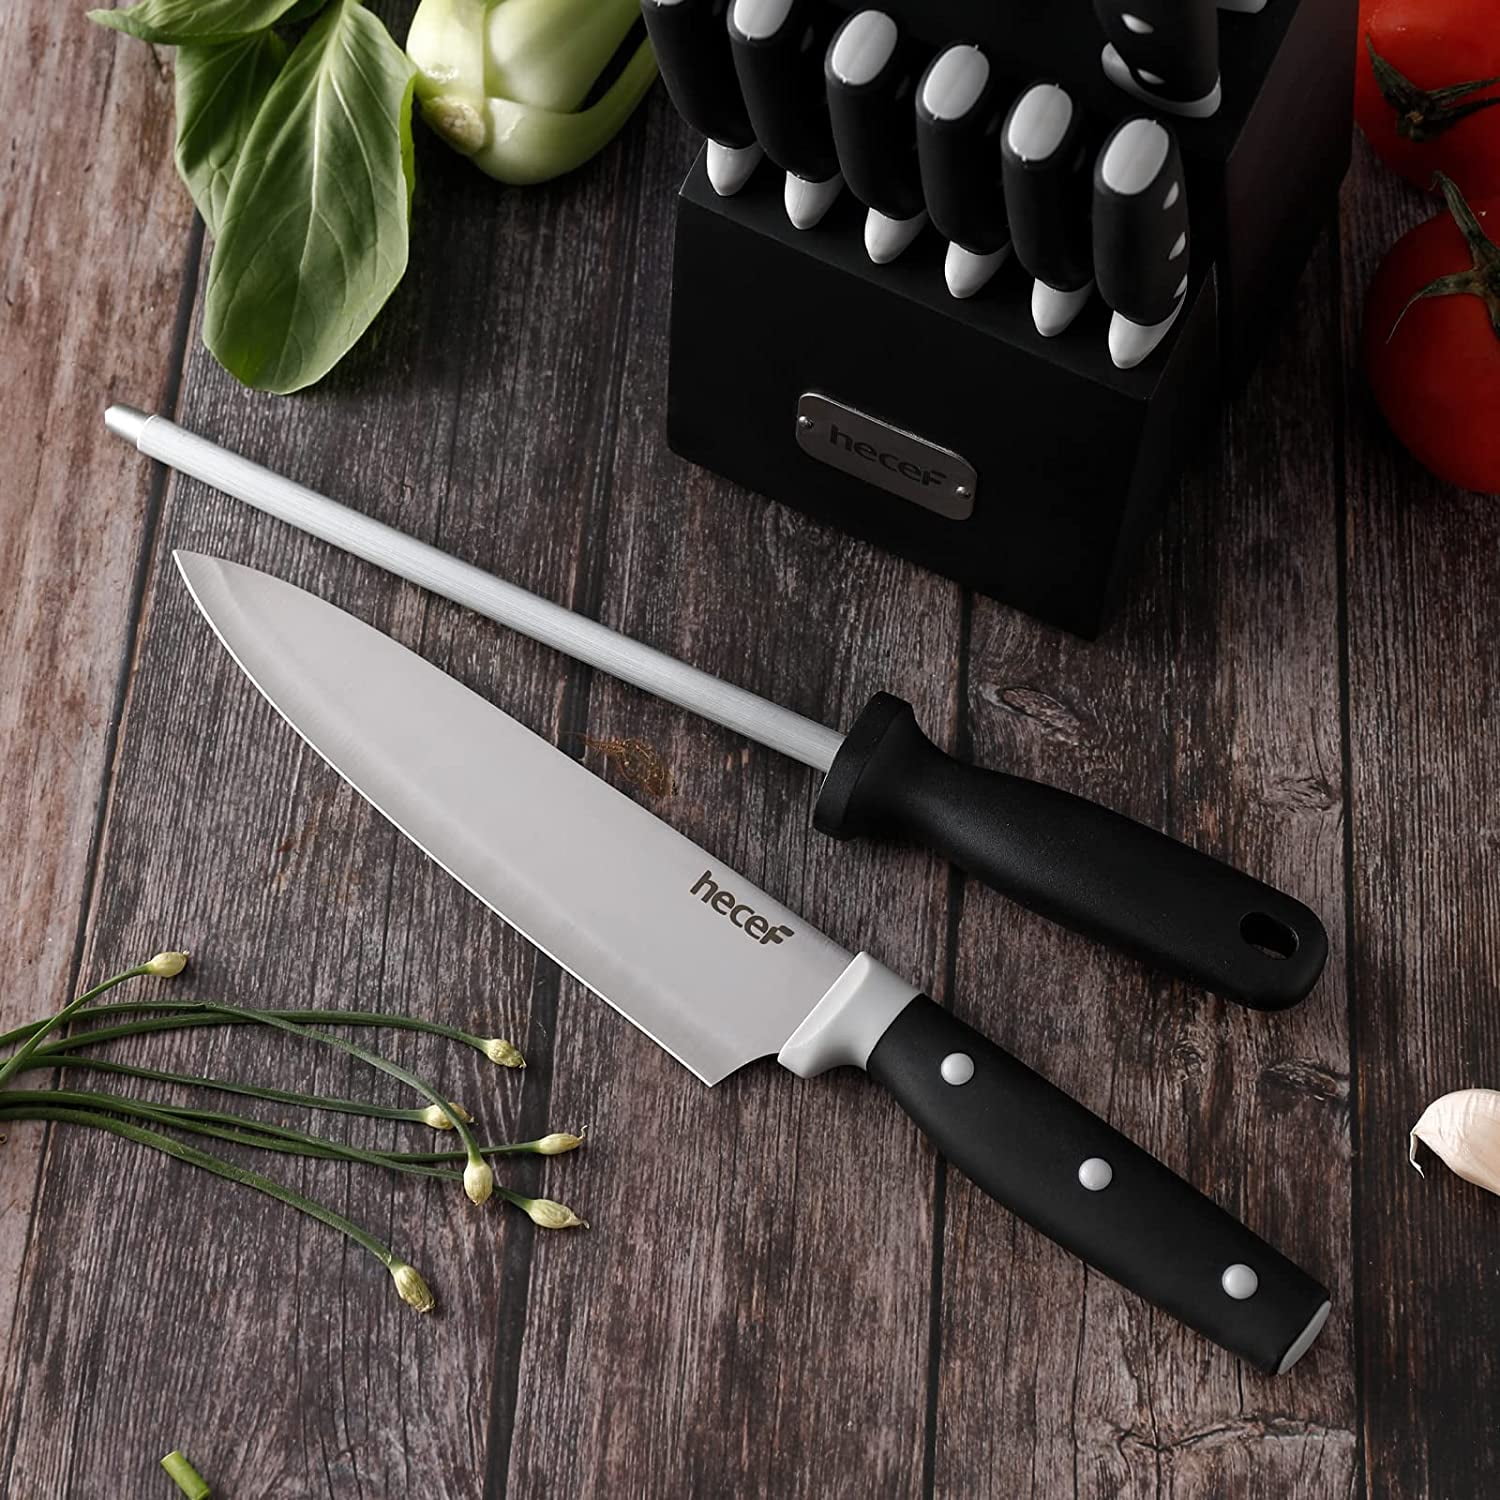 Hecef 27307-PI 14 Piece Stainless Steel Kitchen Knife Set with Block, –  VIPOutlet